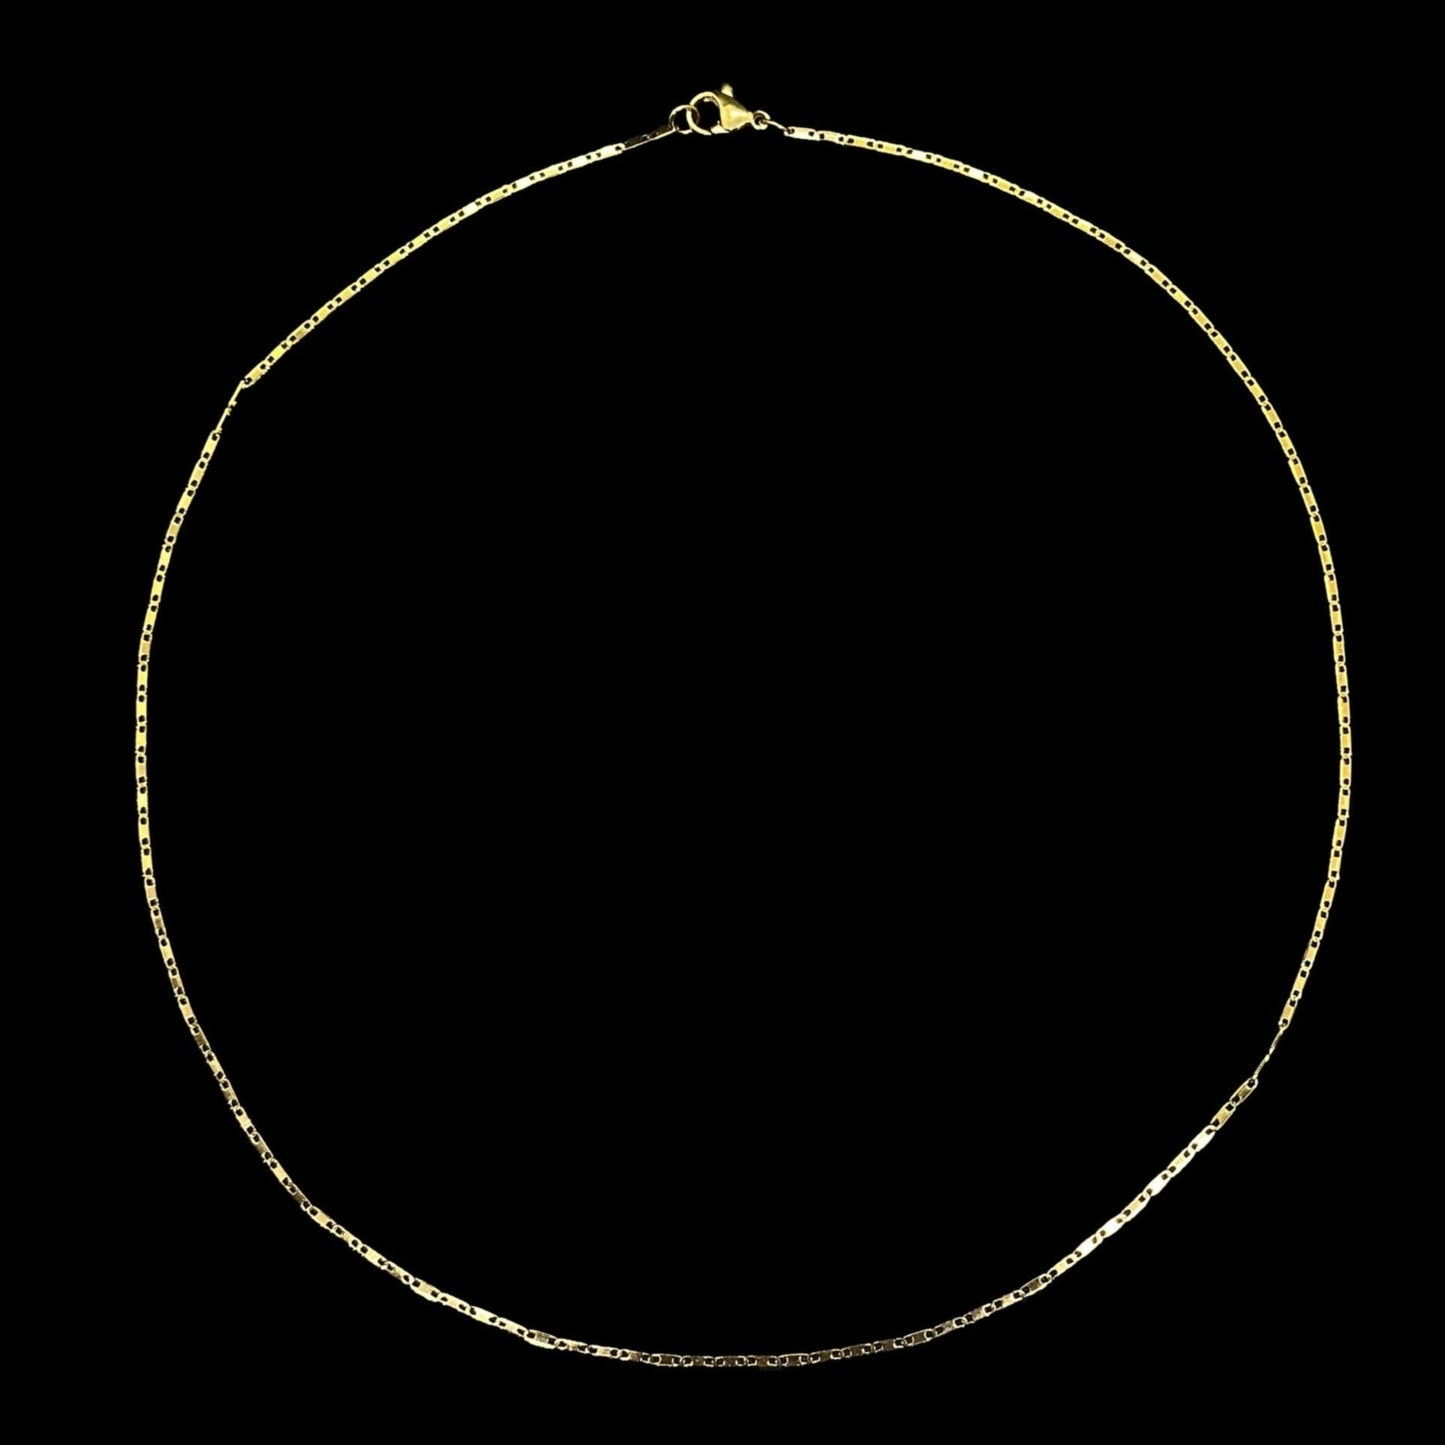 GOLD SMALL MARINER CHAIN -1.5MM